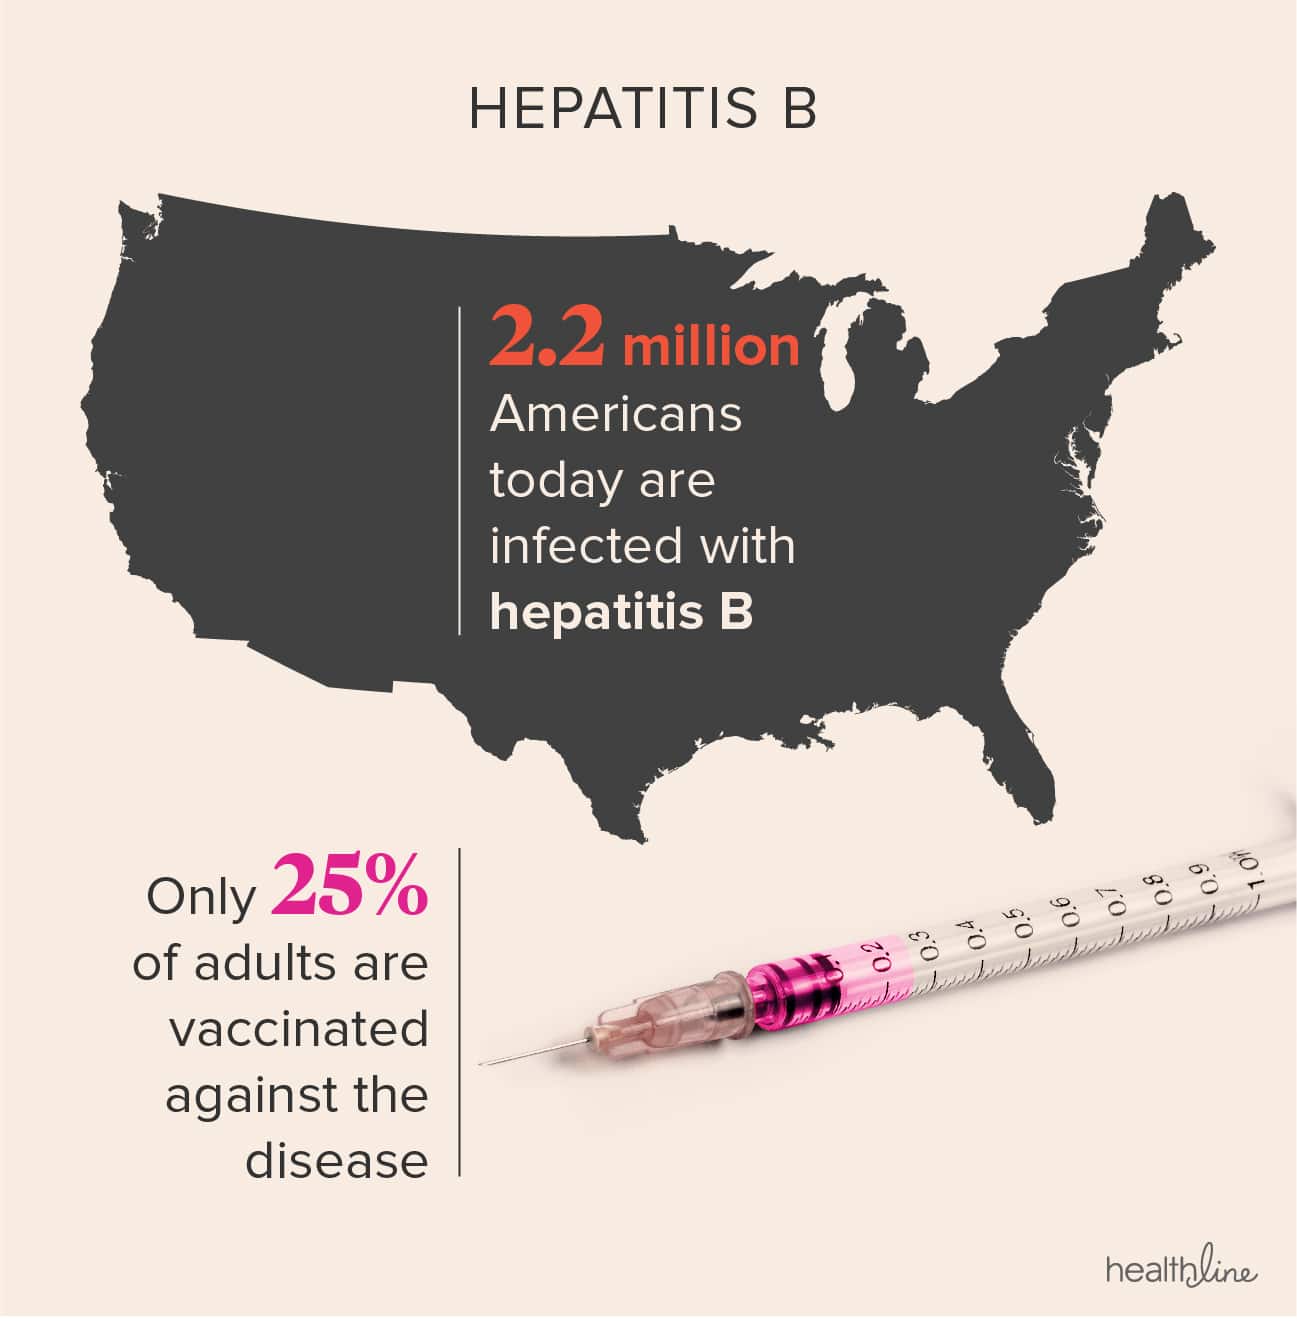 Hepatitis A, B, C, D, E: What You Need to Know